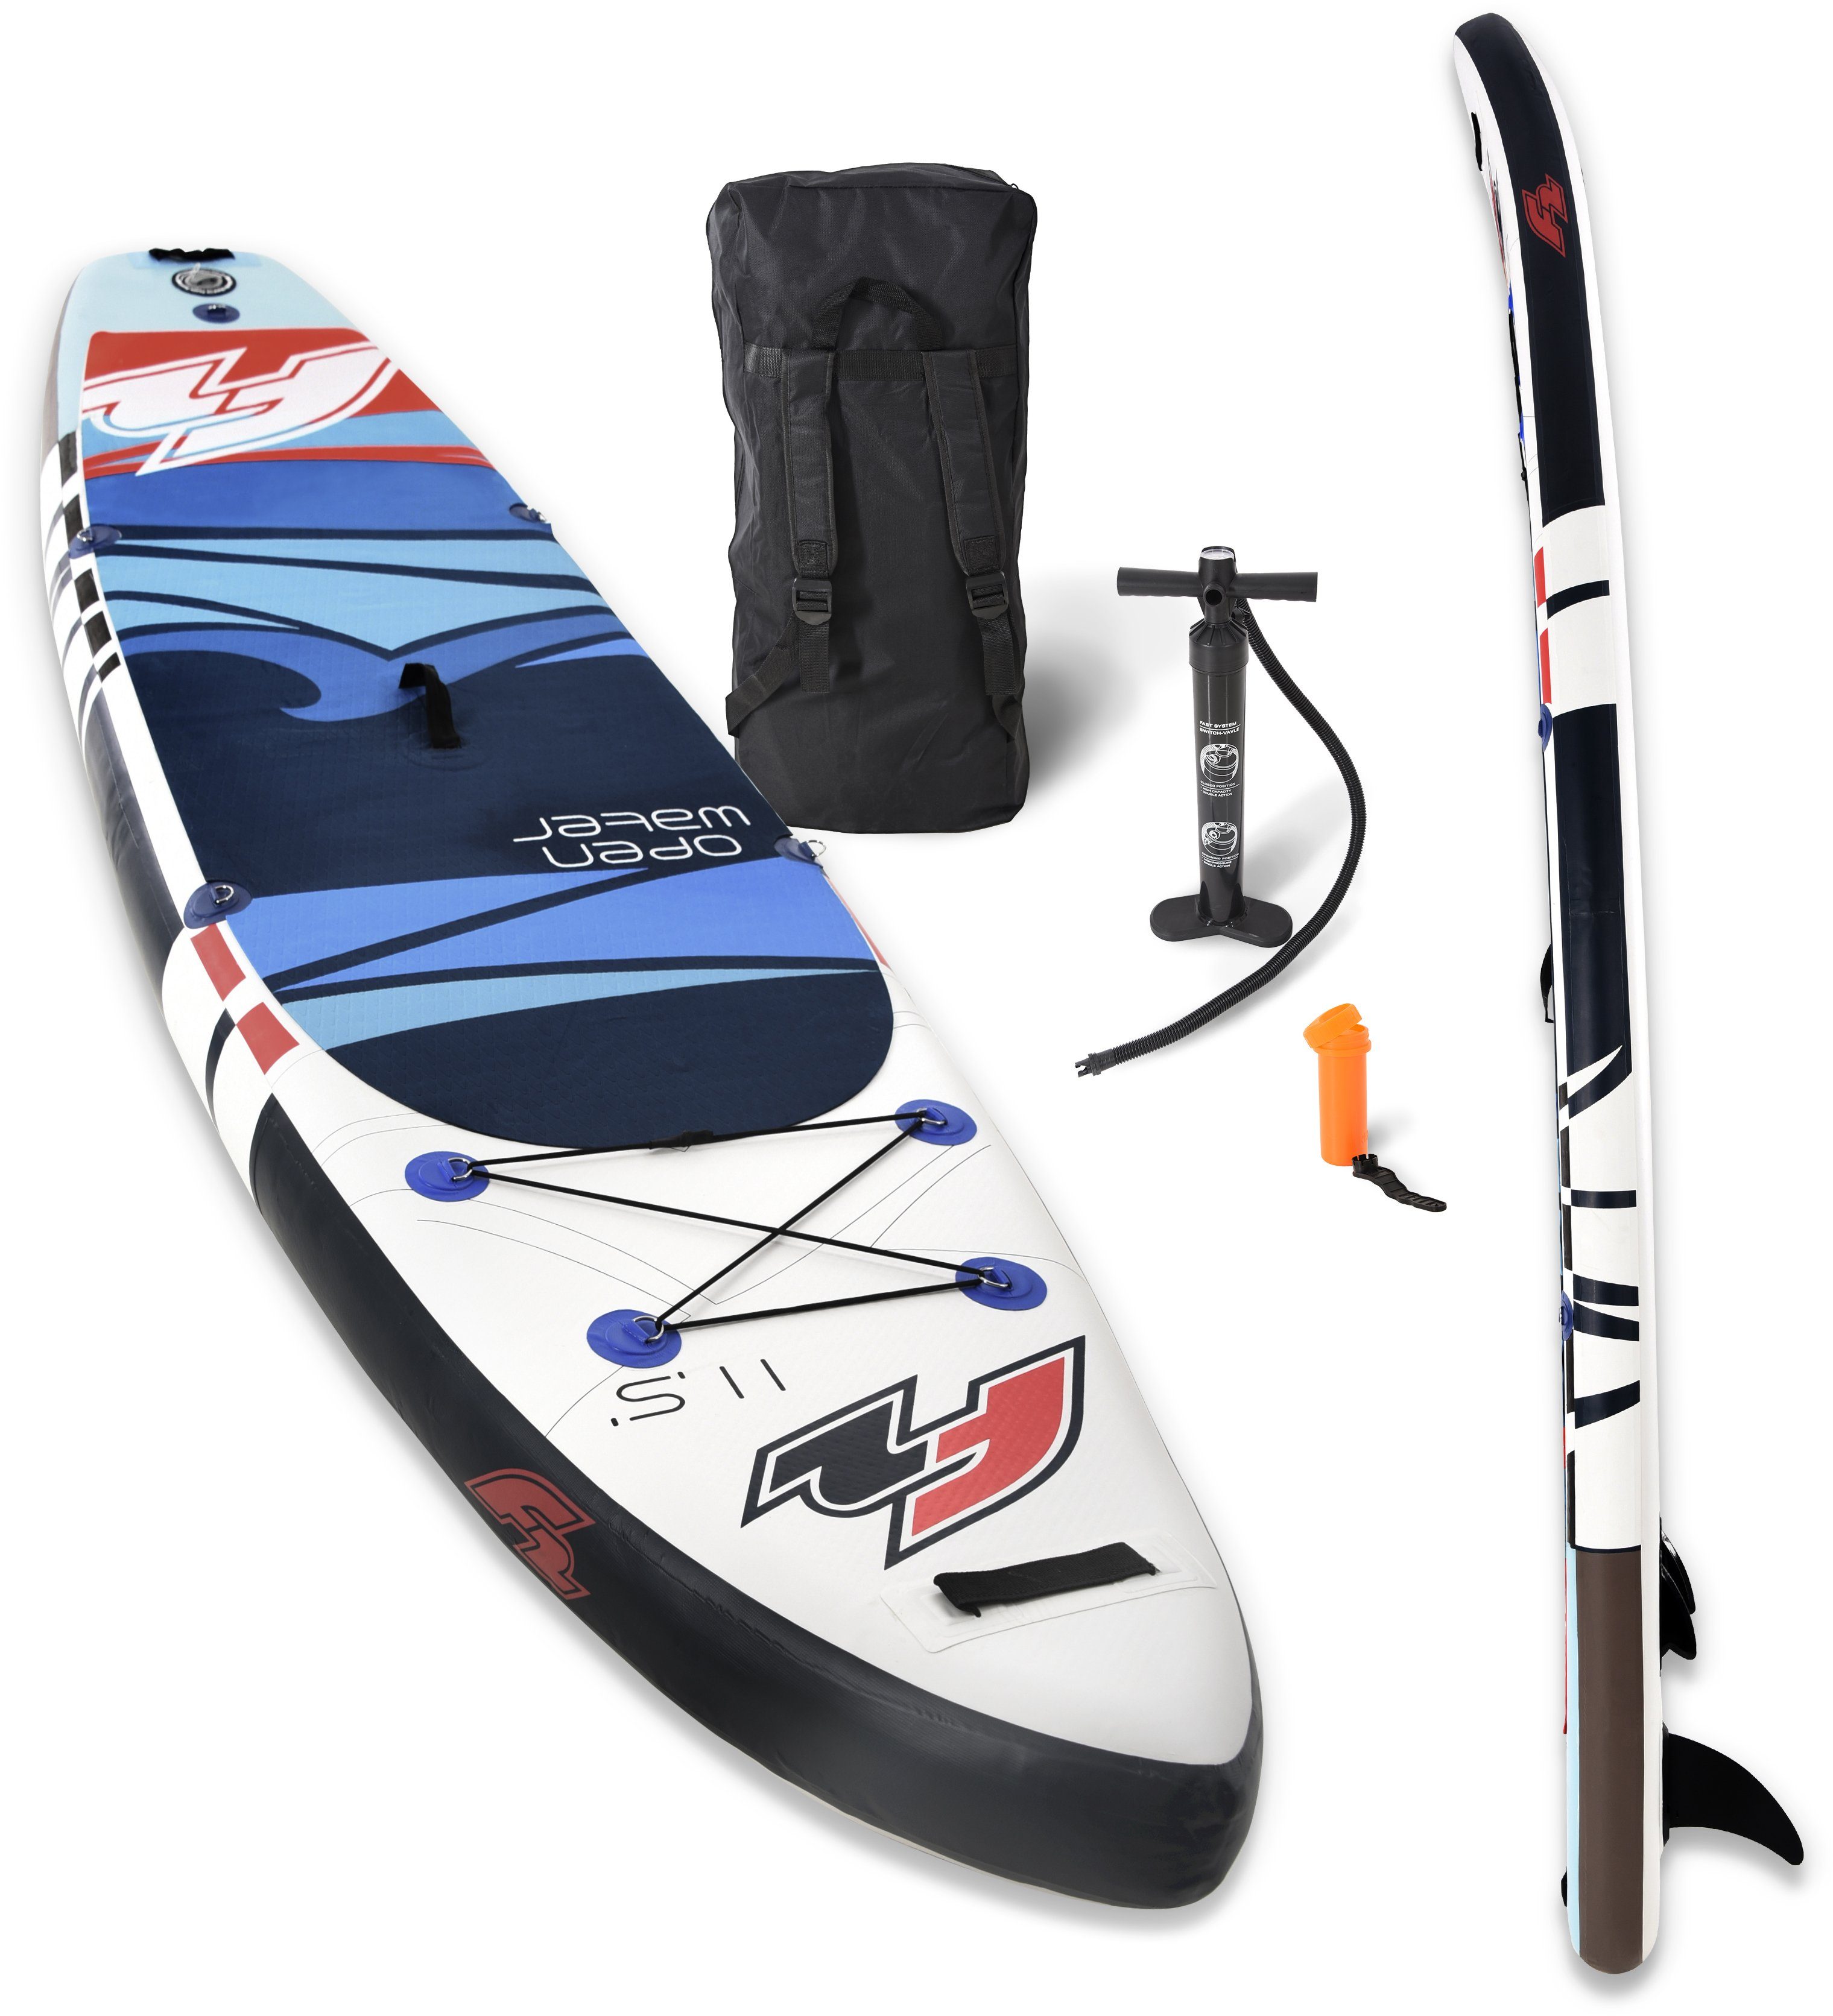 Paddel Open Water F2 ohne SUP-Board